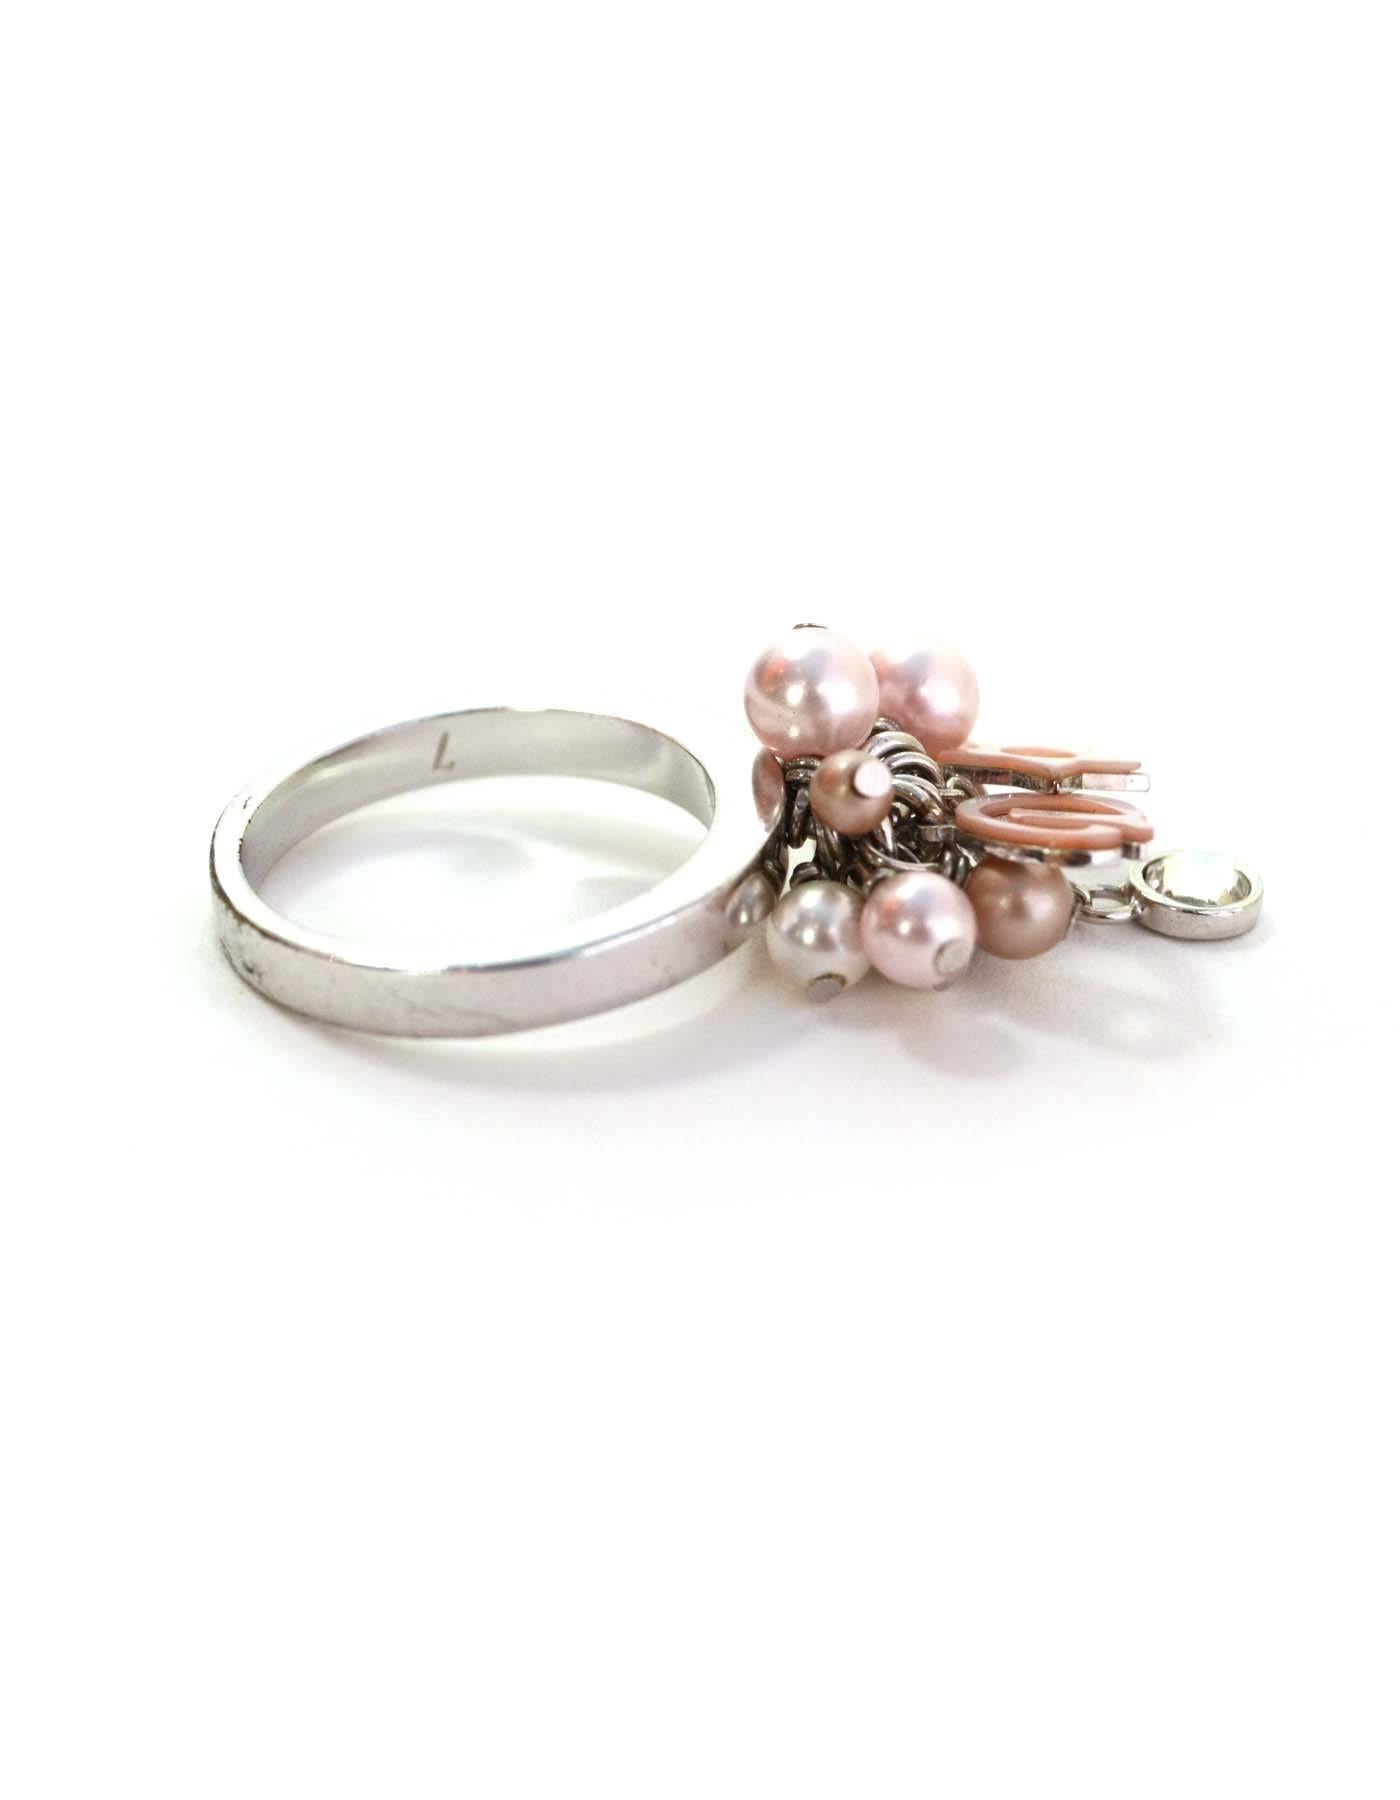 Christian Dior Pink Pearl and Charm Cluster Ring
Features pink, mauve and ivory faux pearl charms, pink 